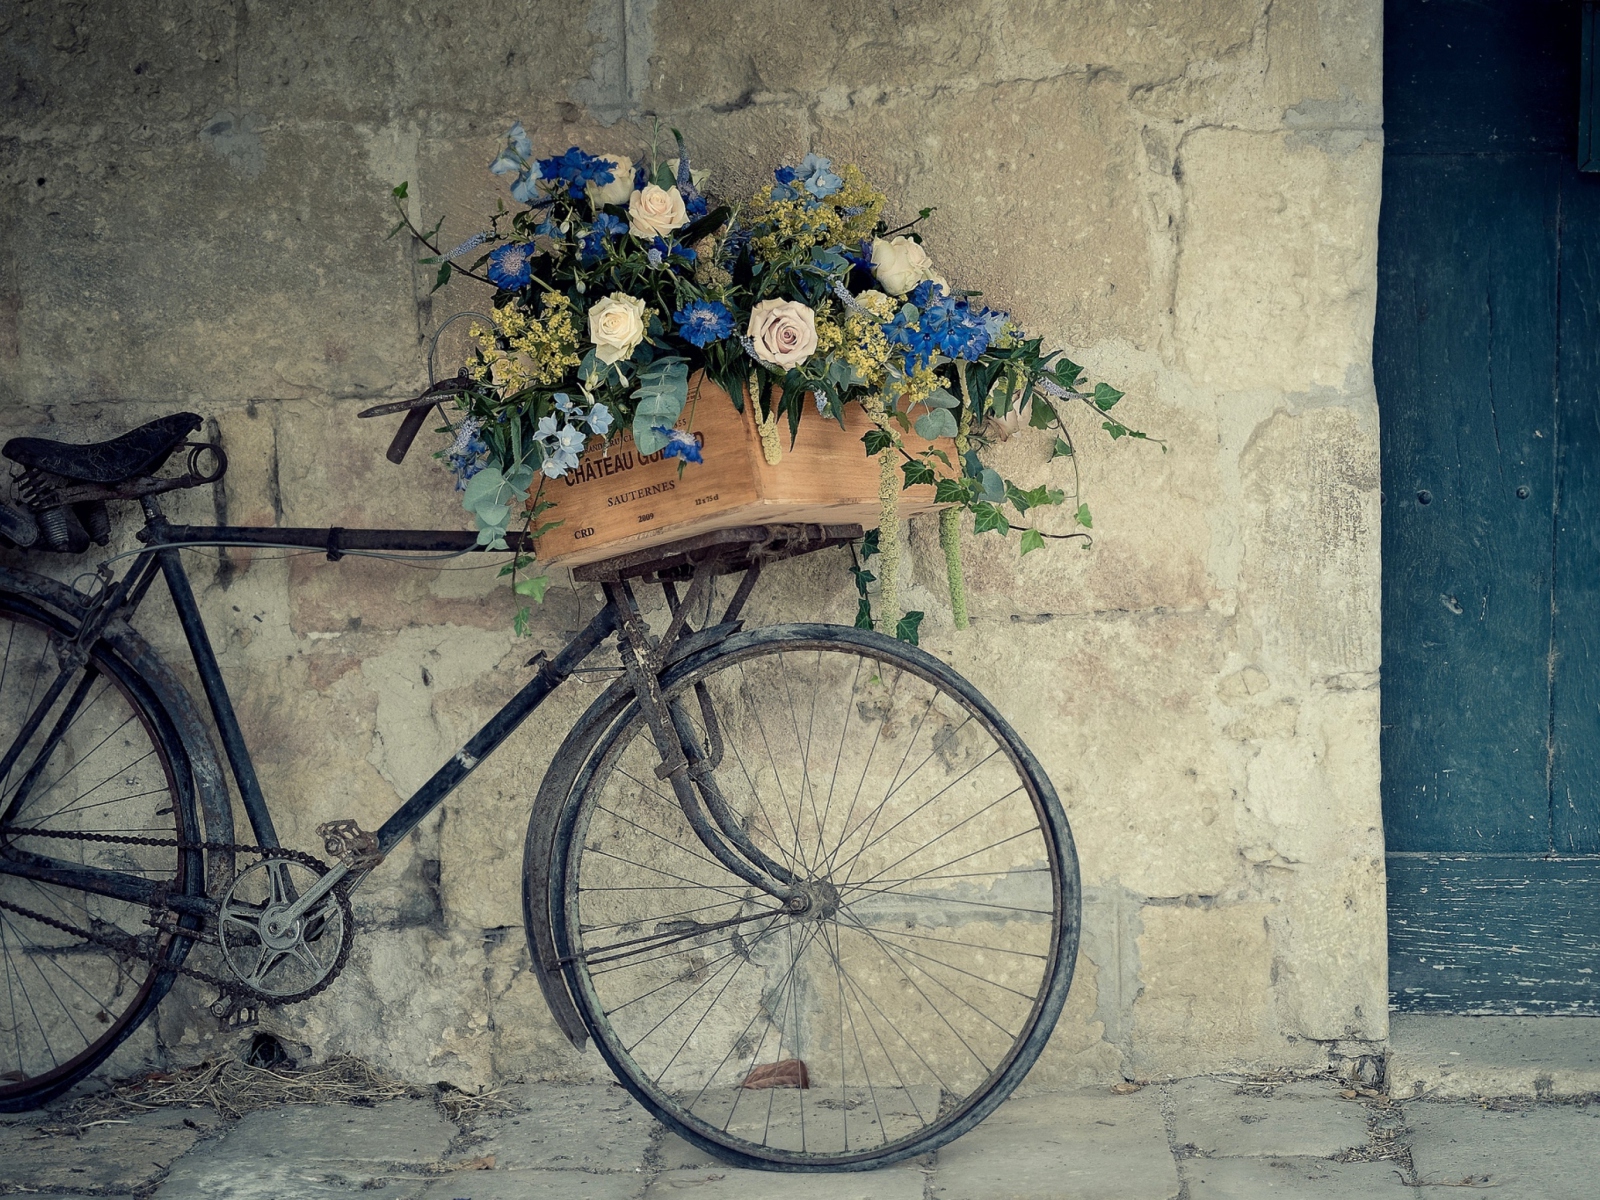 Fondo de pantalla Bicycle With Basket Full Of Flowers 1600x1200